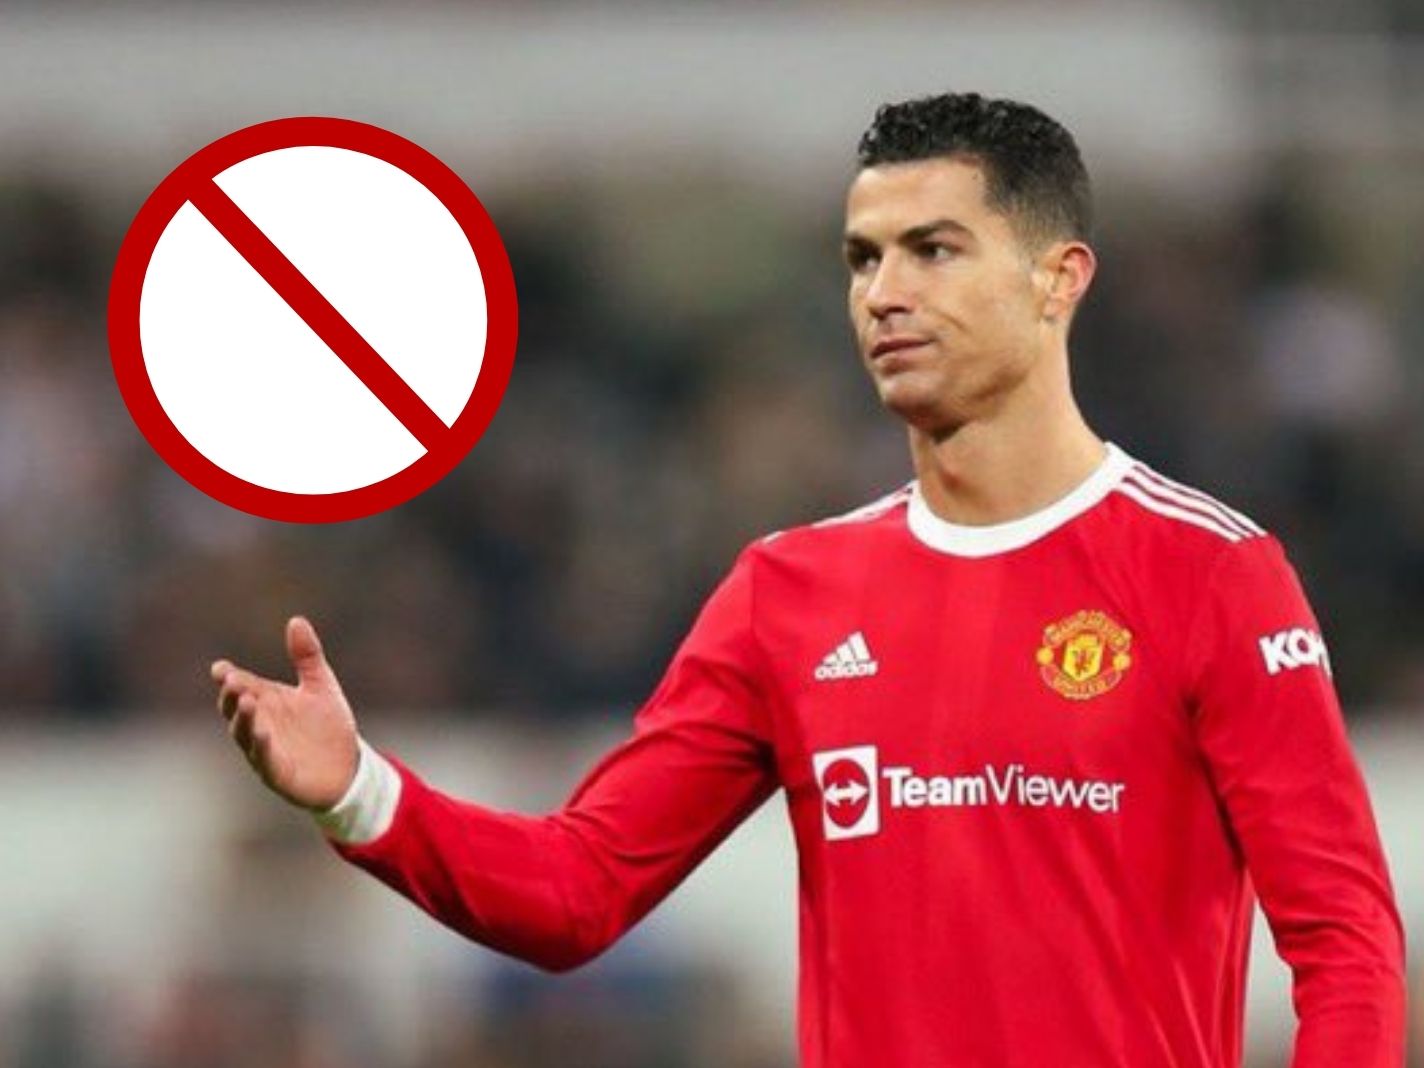 When Cristiano Ronaldo, whose current value is €35m, blocked Transfermarkt for valuing him at €75m